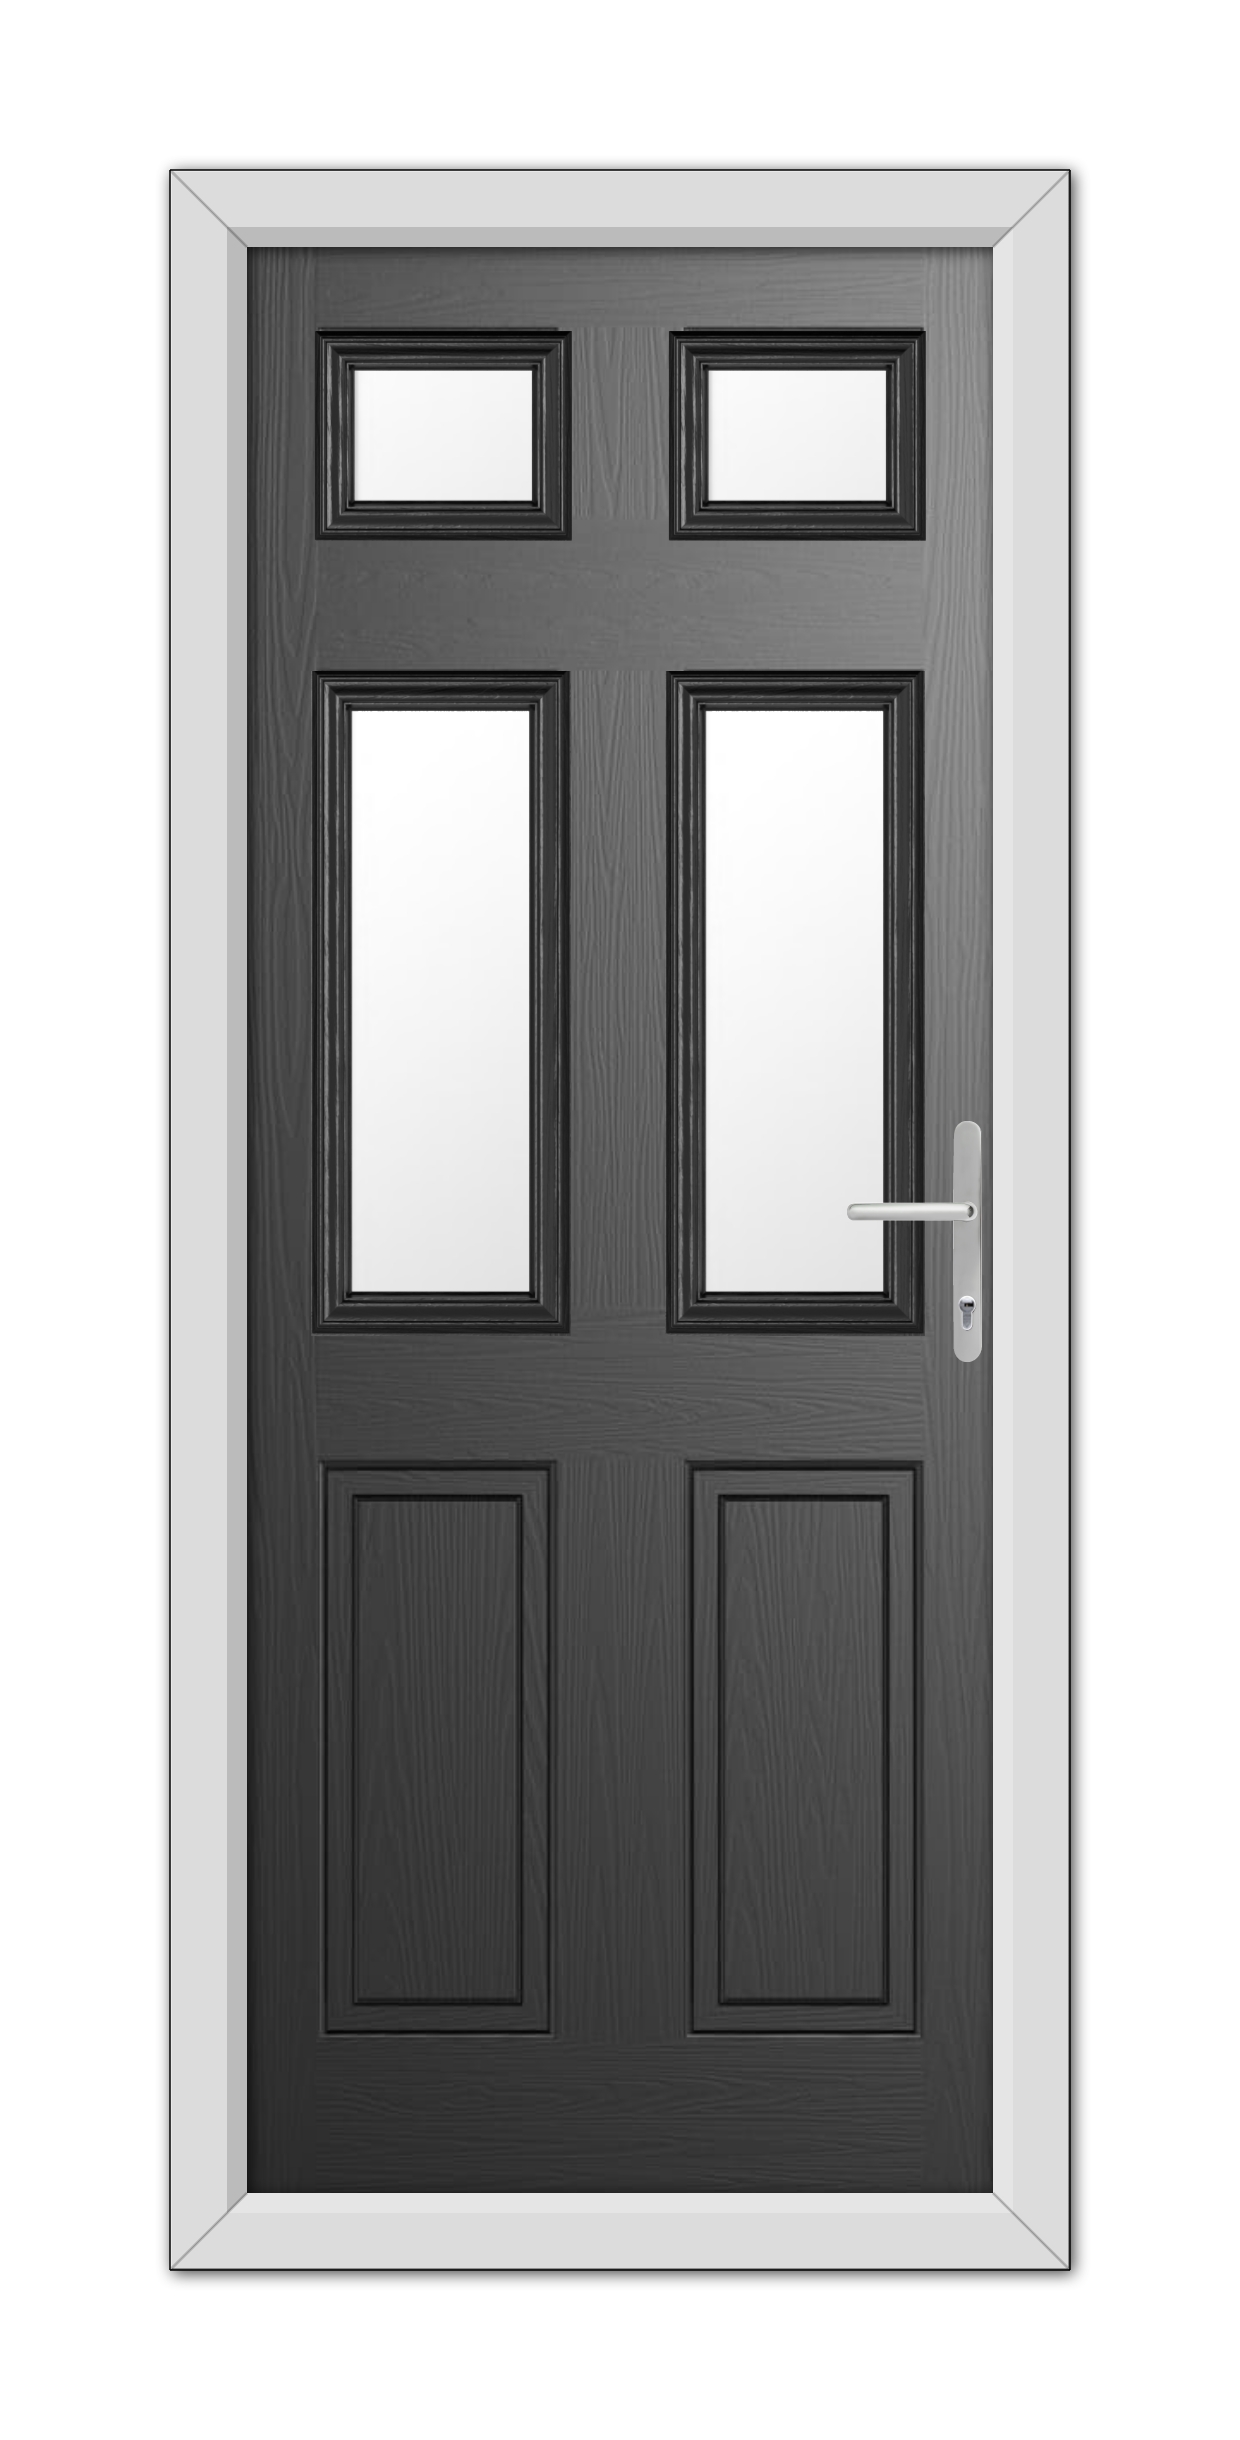 A modern Black Middleton Glazed 4 Composite Door 48mm Timber Core with white trim, featuring upper glass panels and a metallic handle on the right side.